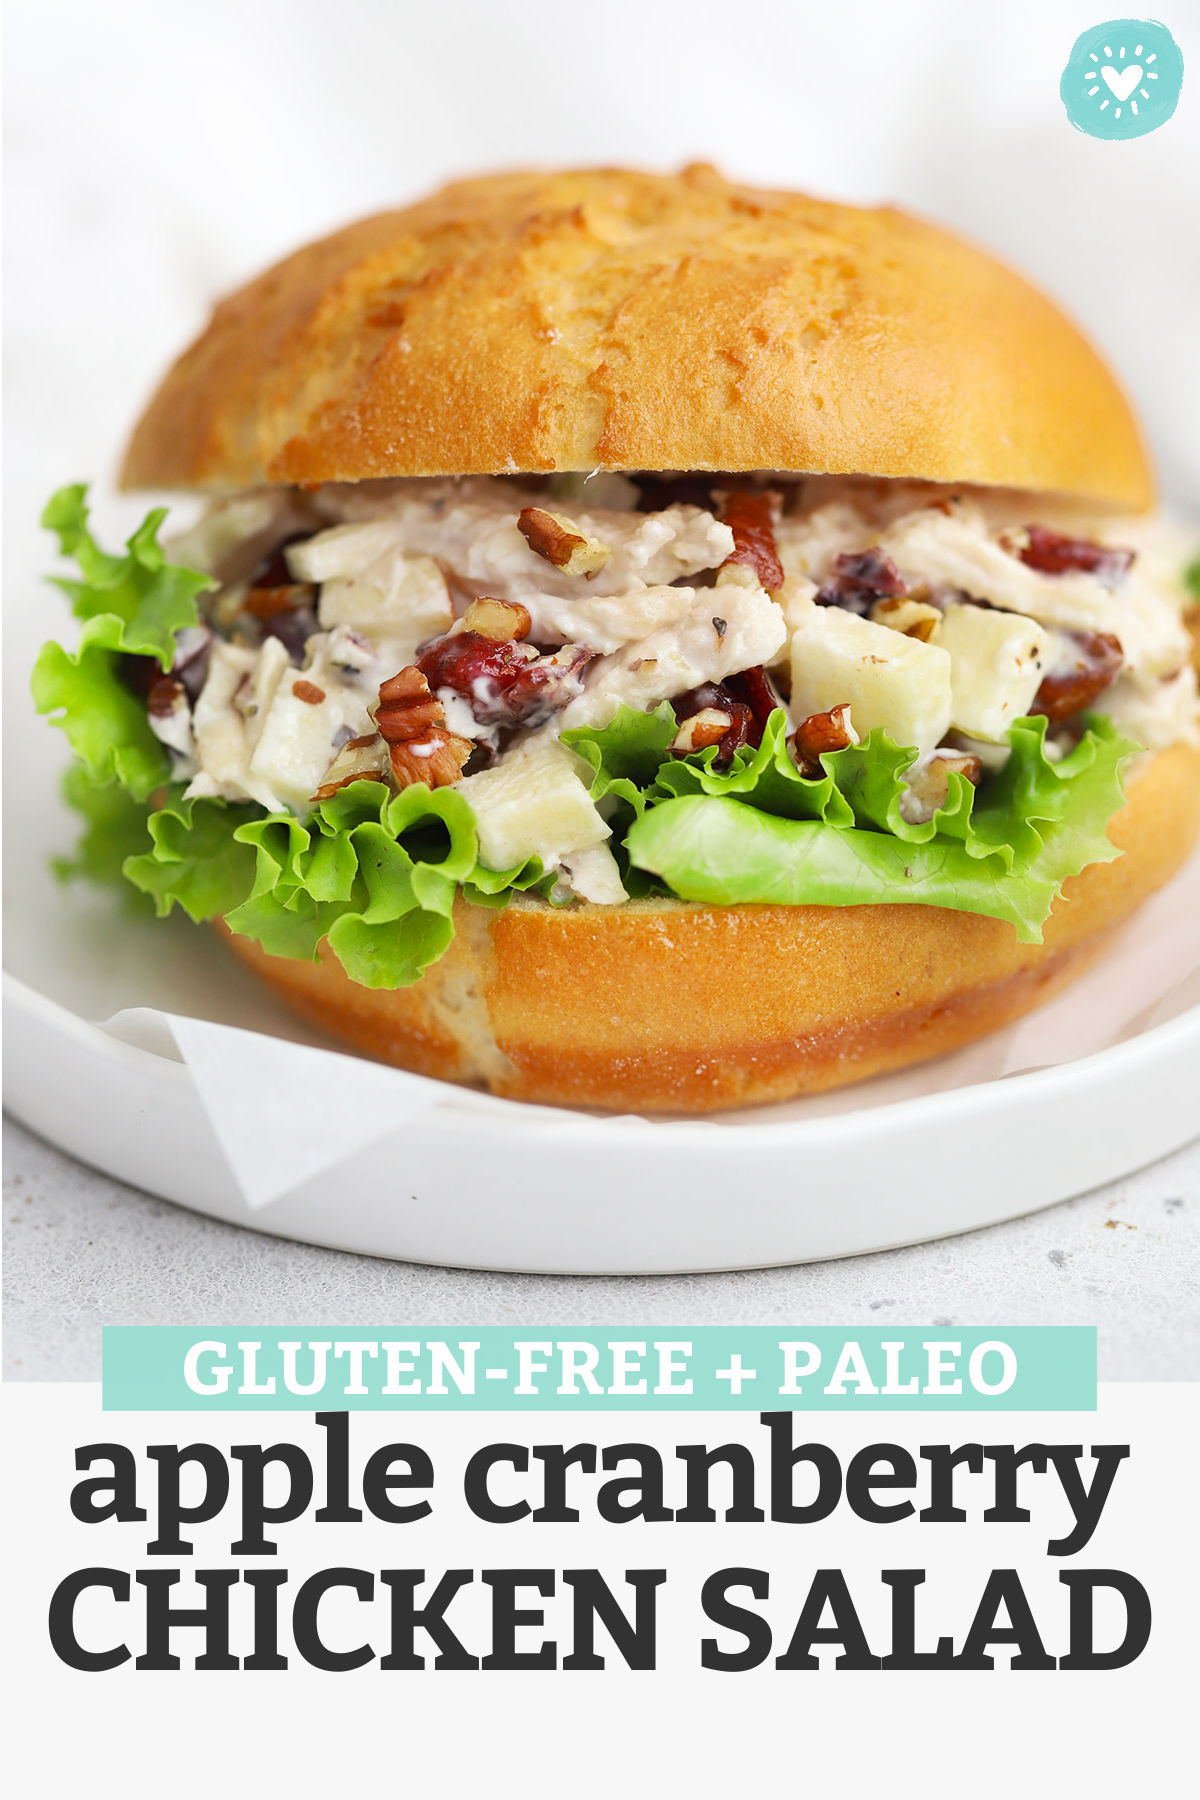 Apple Chicken Salad - This chicken salad with apples is perfect for the start of fall! It's the perfect combination of savory, sweet, creamy, and crunchy. Don't miss all our serving ideas below! (Gluten-Free, Paleo-Friendly) // Apple Chicken Salad // Pecan Chicken Salad // Cranberry Pecan Chicken Salad // Fall Chicken Salad